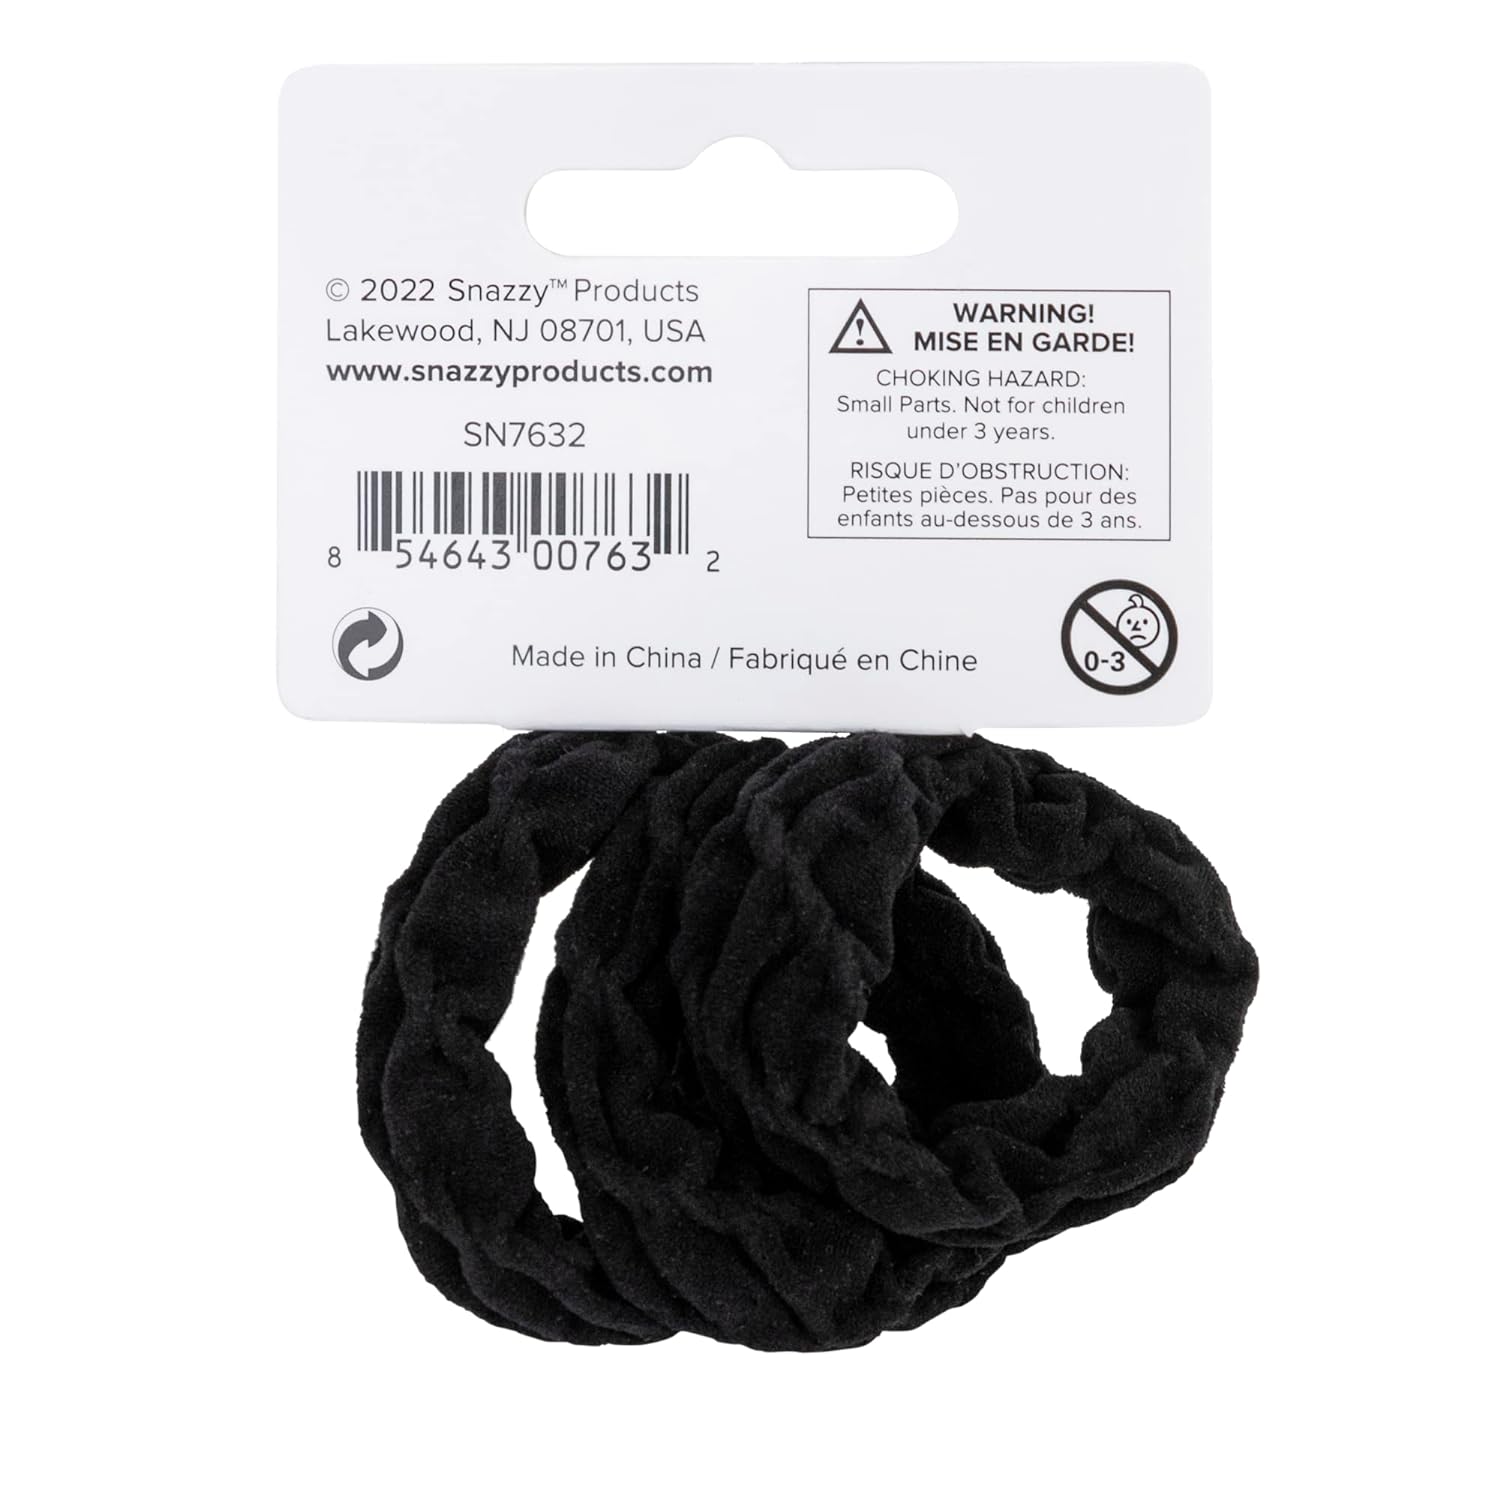 Snazzy Gentle Hold Soft and Stretchy Seamless Elastic Nylon Fabric Hair Bands, 1 Pack 3 per card